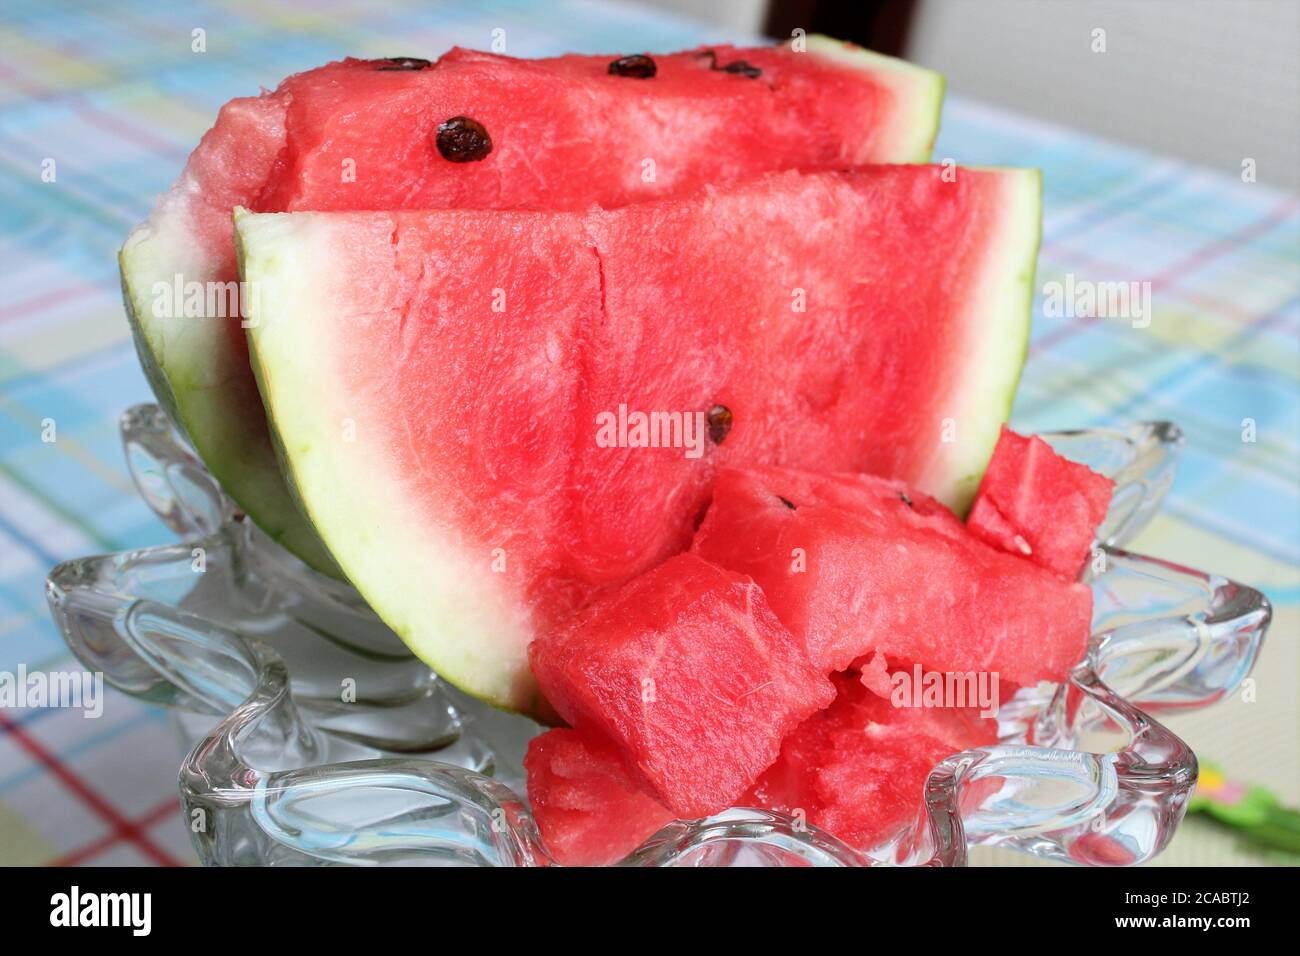 A slice of fresh, ripe watermelon on a glass plate Stock Photo